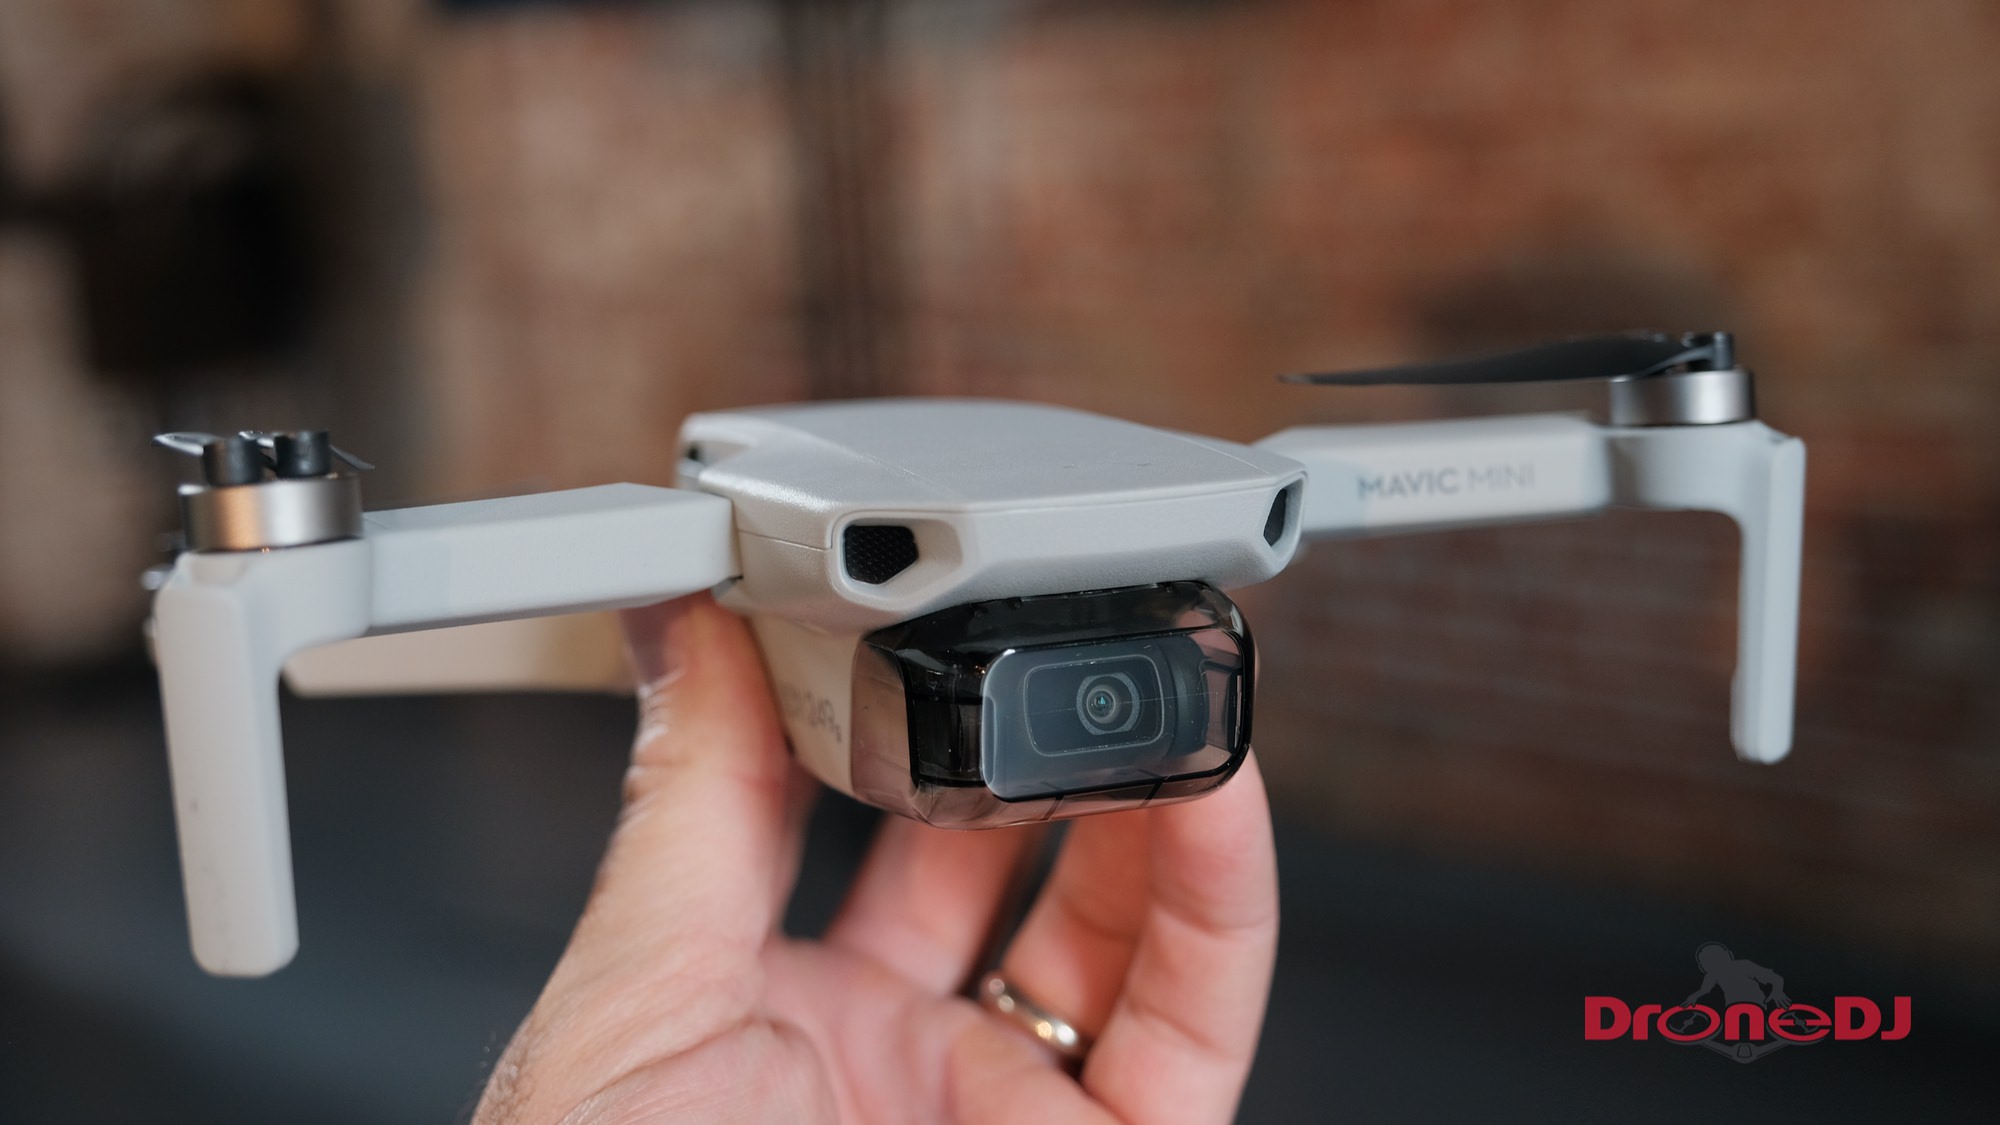 DJI Mavic Mini introduced — new Ultra-Light drone weighs only 249 grams!